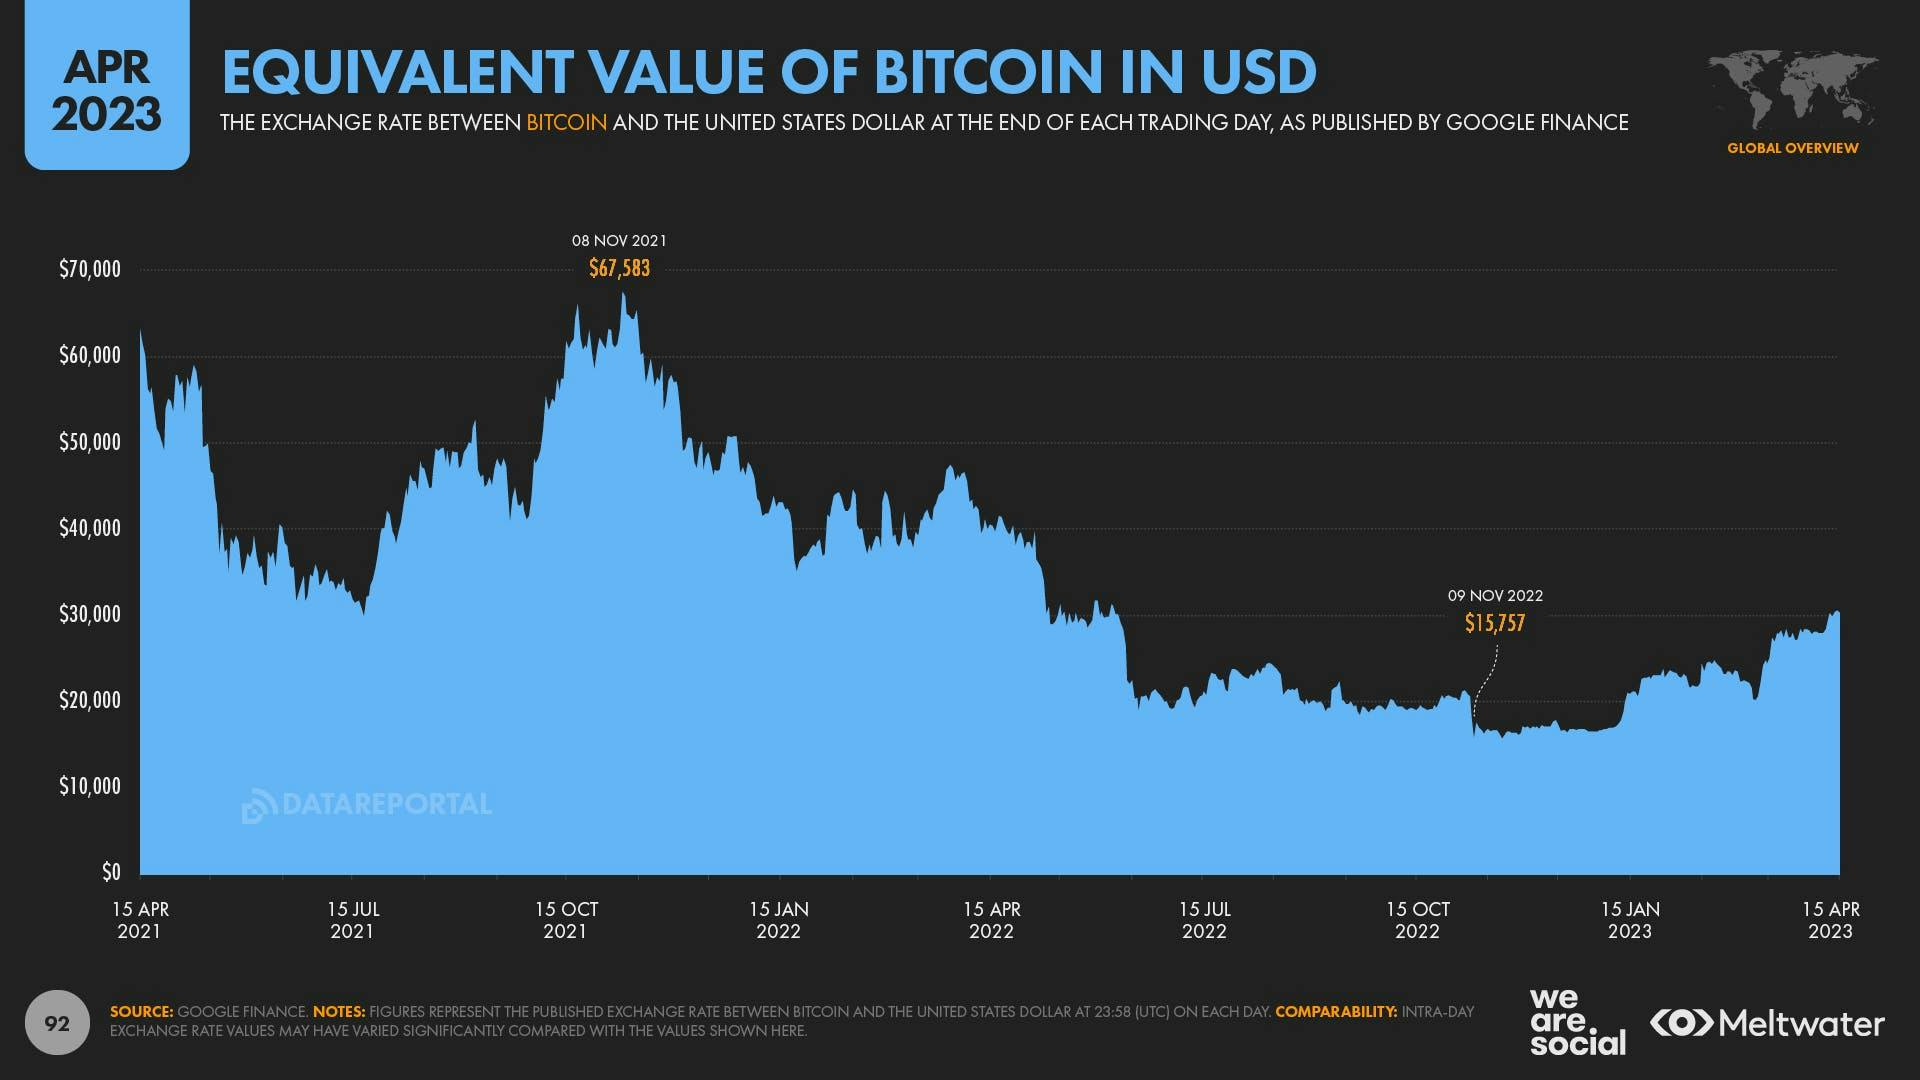 April 2023 Global State of Digital Report: Equivalent Value of Bitcoin in USD